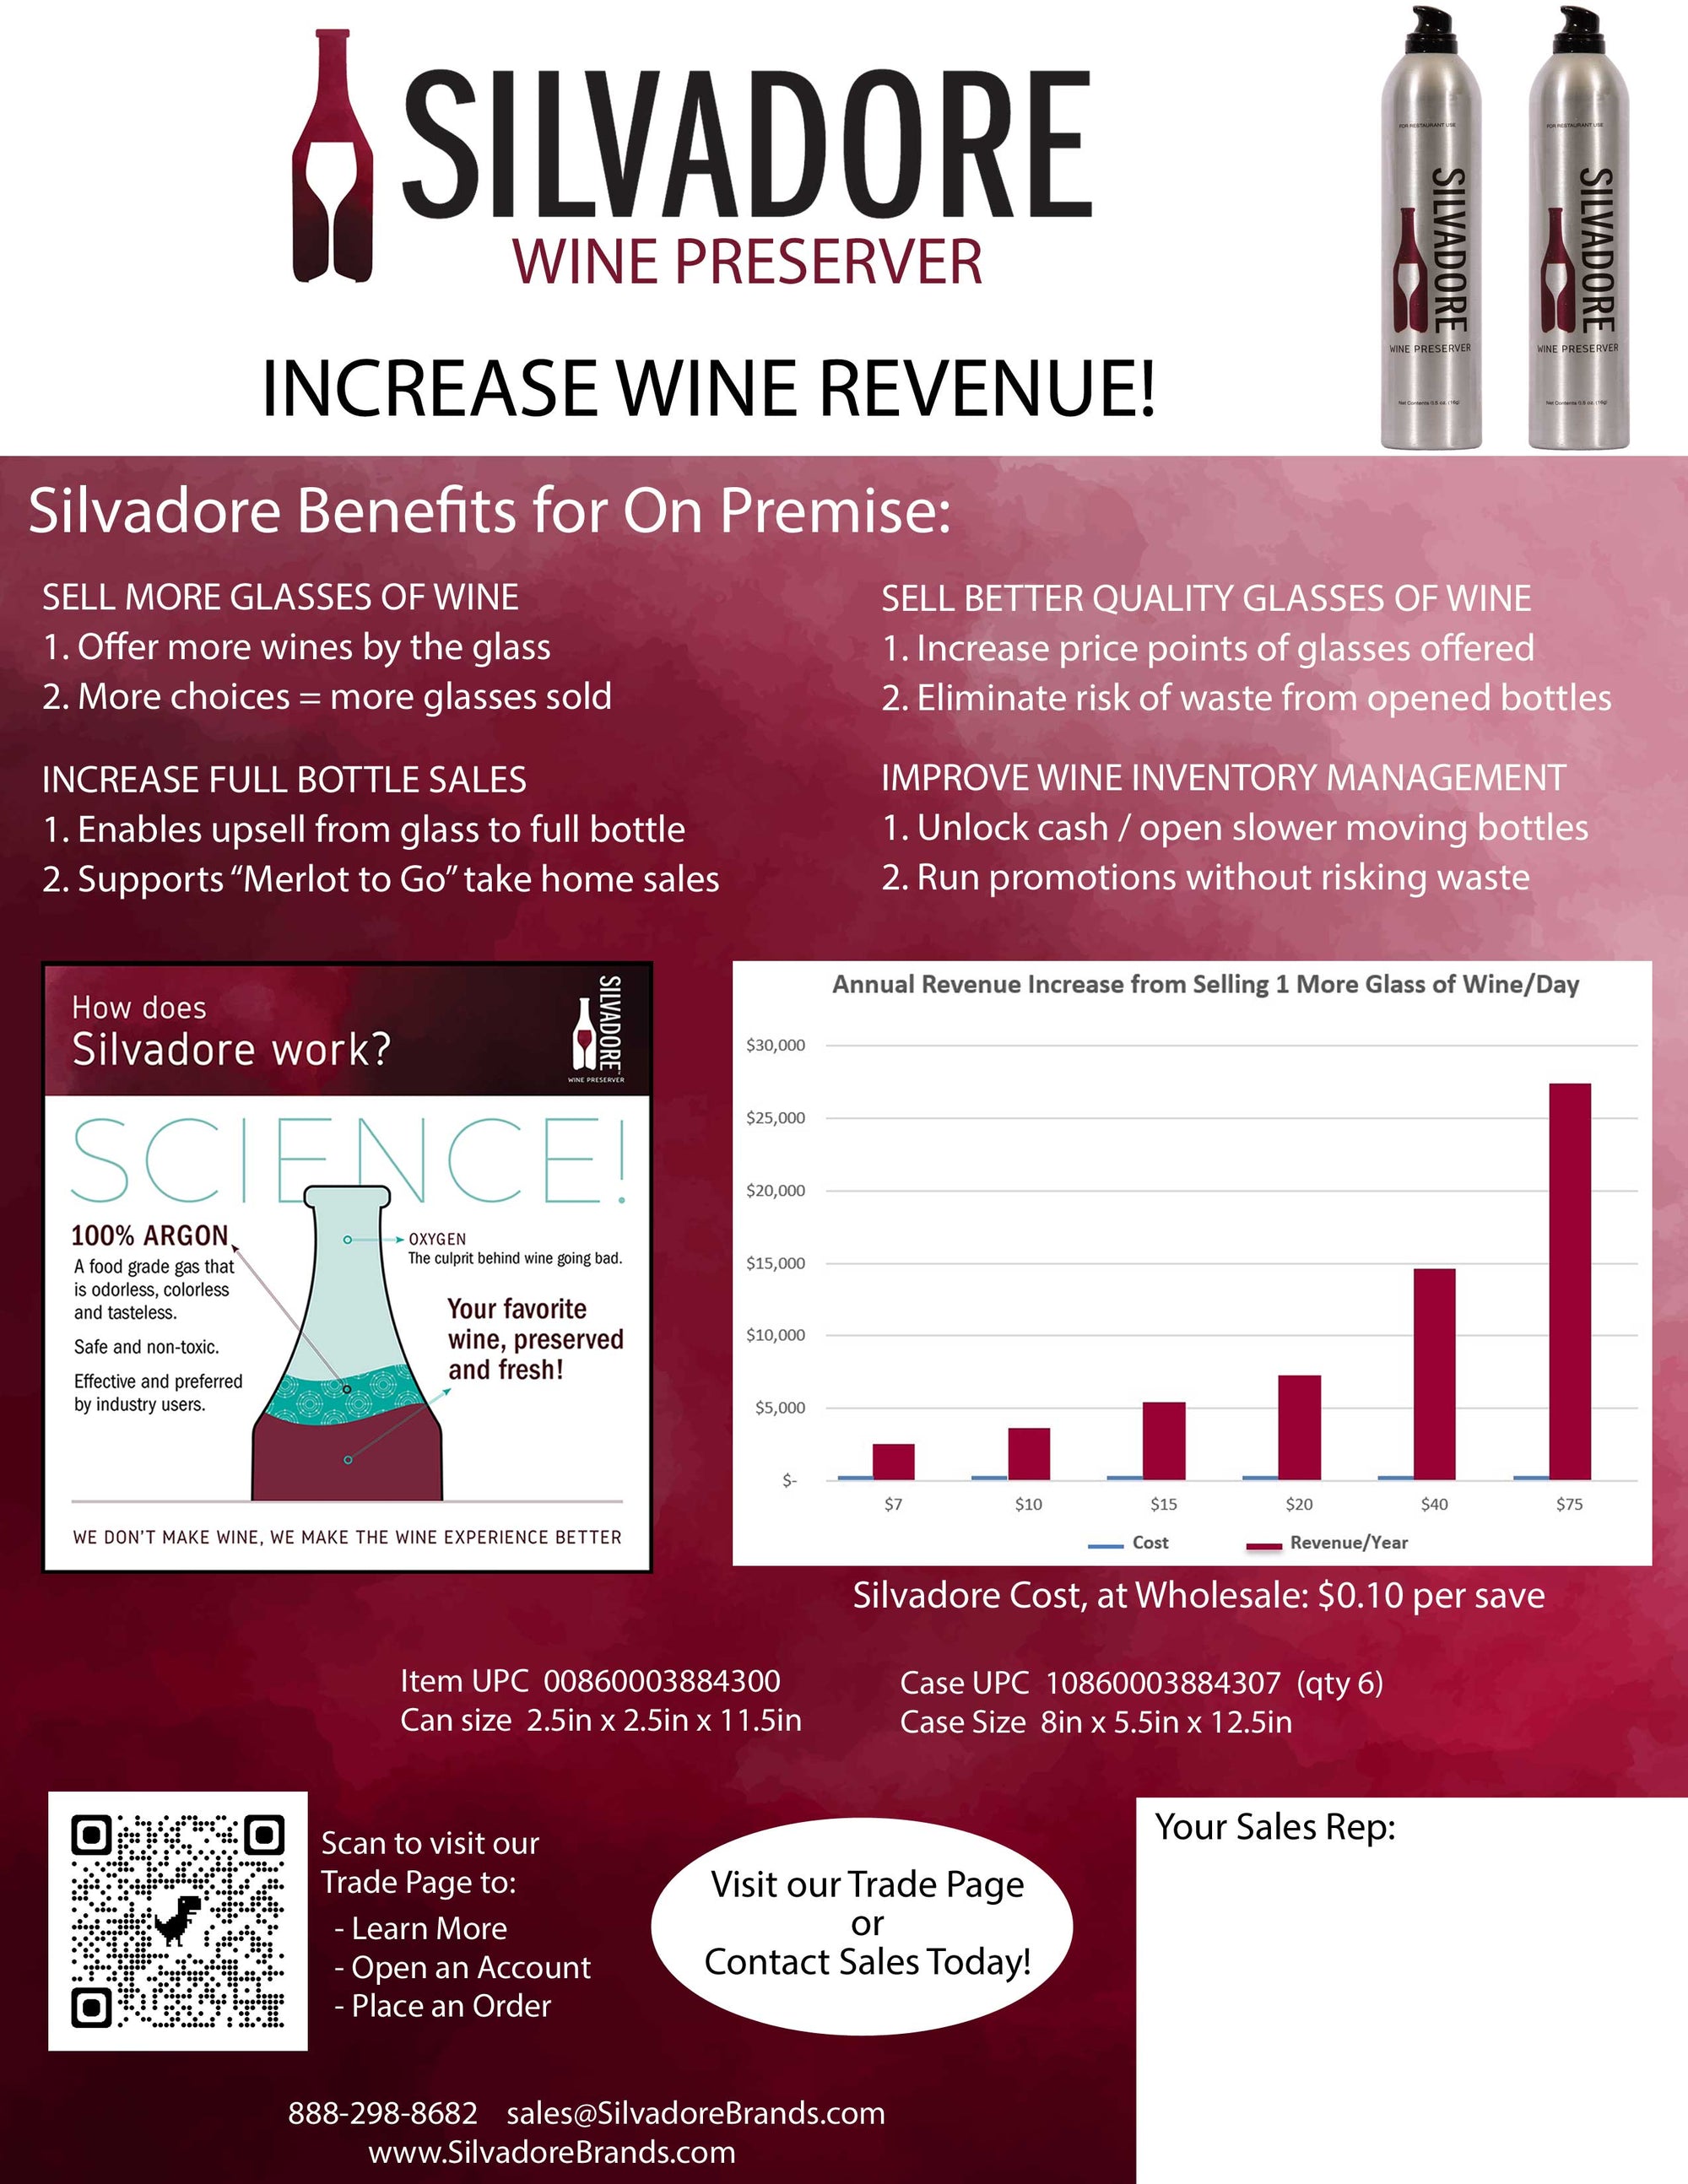 Gary's Thoughts on Increasing Wine Revenue for On Premise Operators